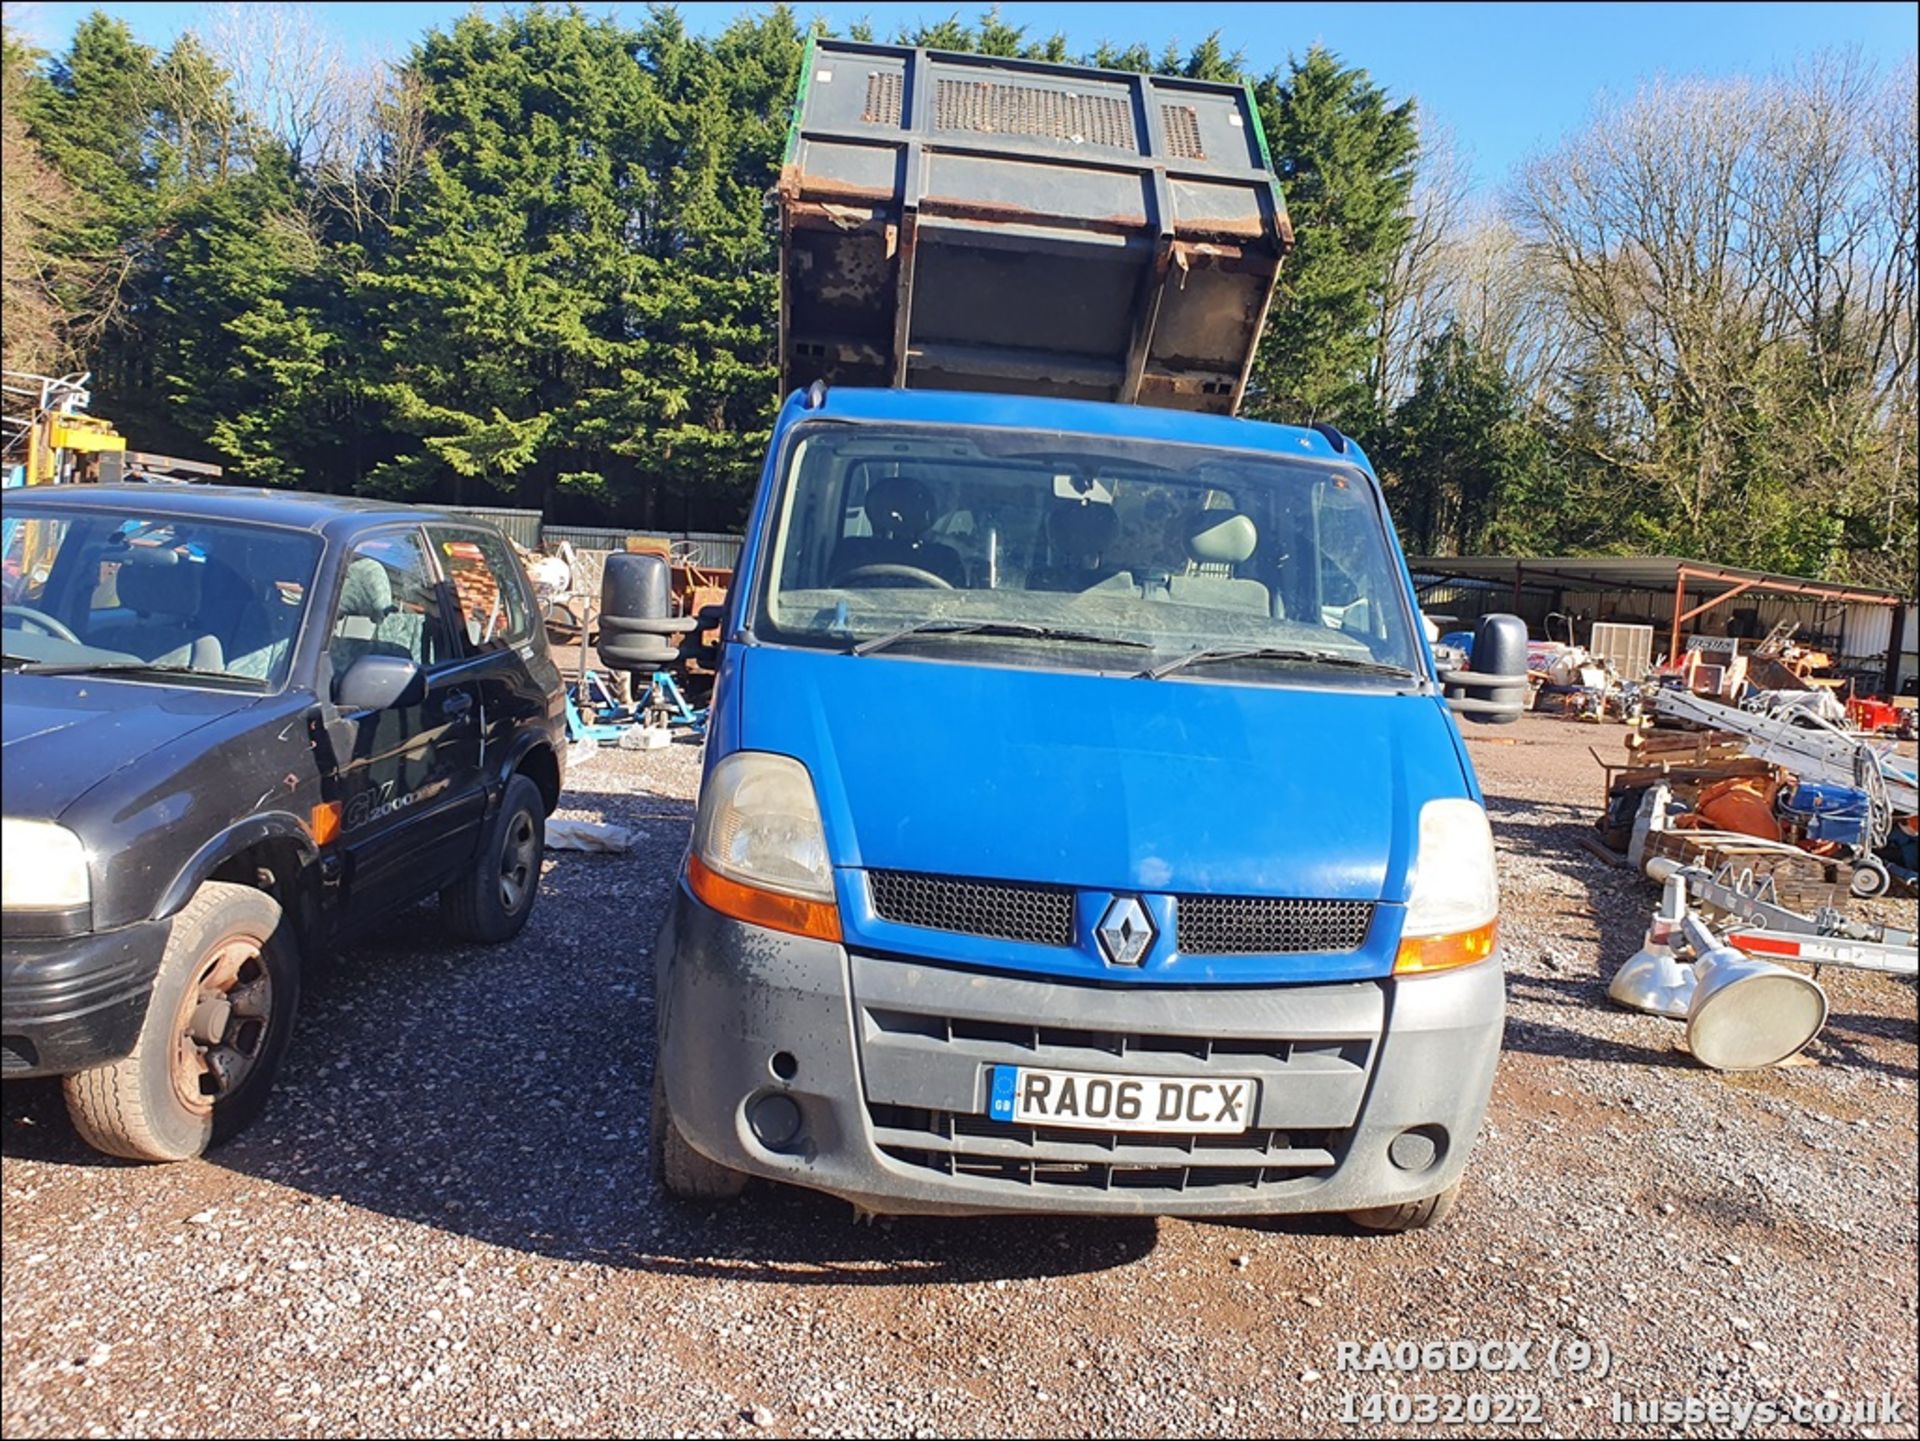 06/06 RENAULT MASTER CCML35 DCI 120 MWB - 2463cc 2dr Tipper (Grey) - Image 10 of 23